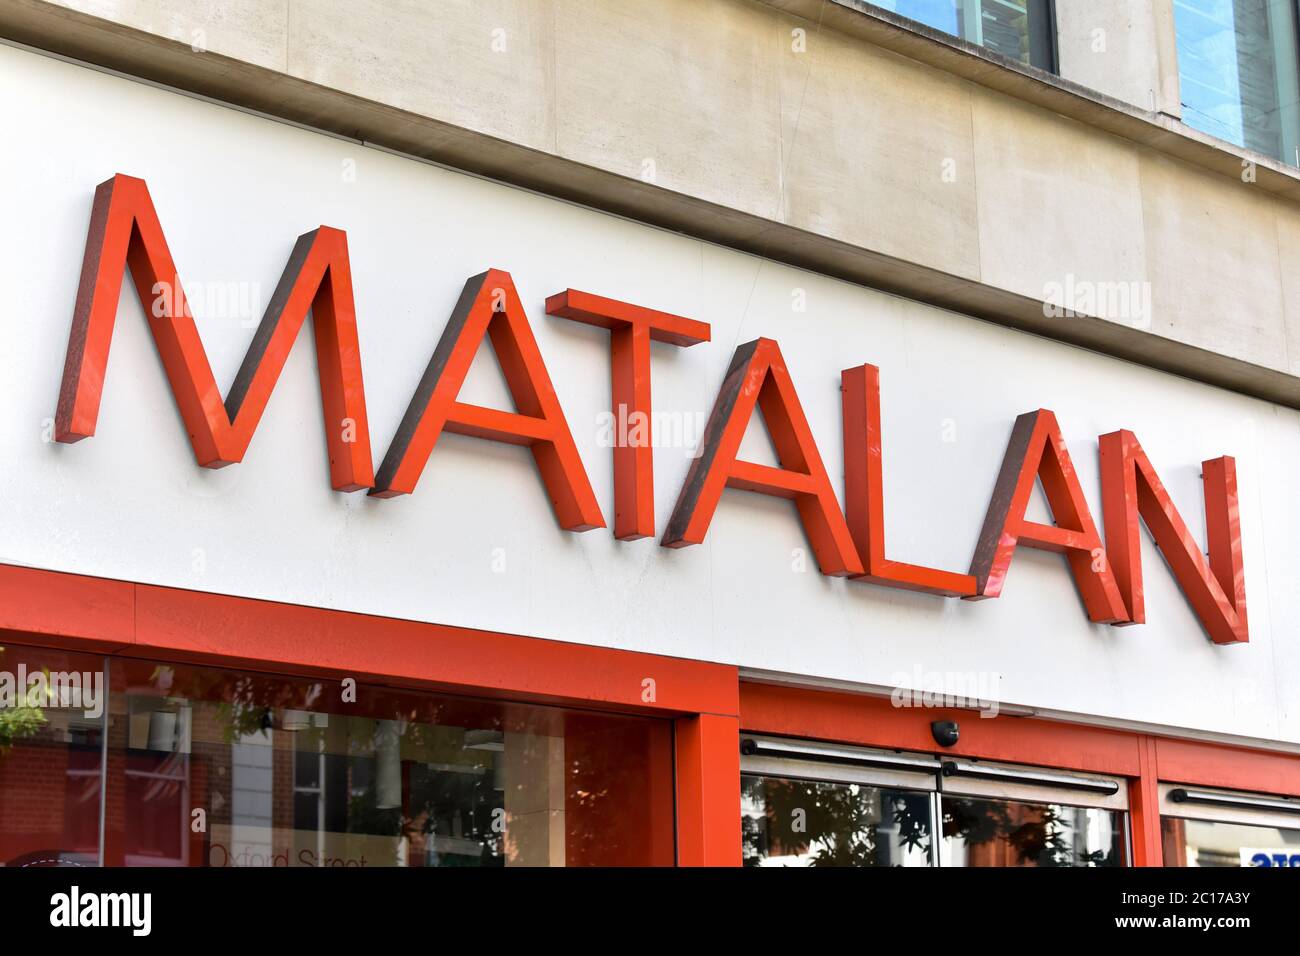 London, UK. 28th May, 2020. Matalan shop sign in Oxford Street. Credit: Dave Rushen/SOPA Images/ZUMA Wire/Alamy Live News Stock Photo